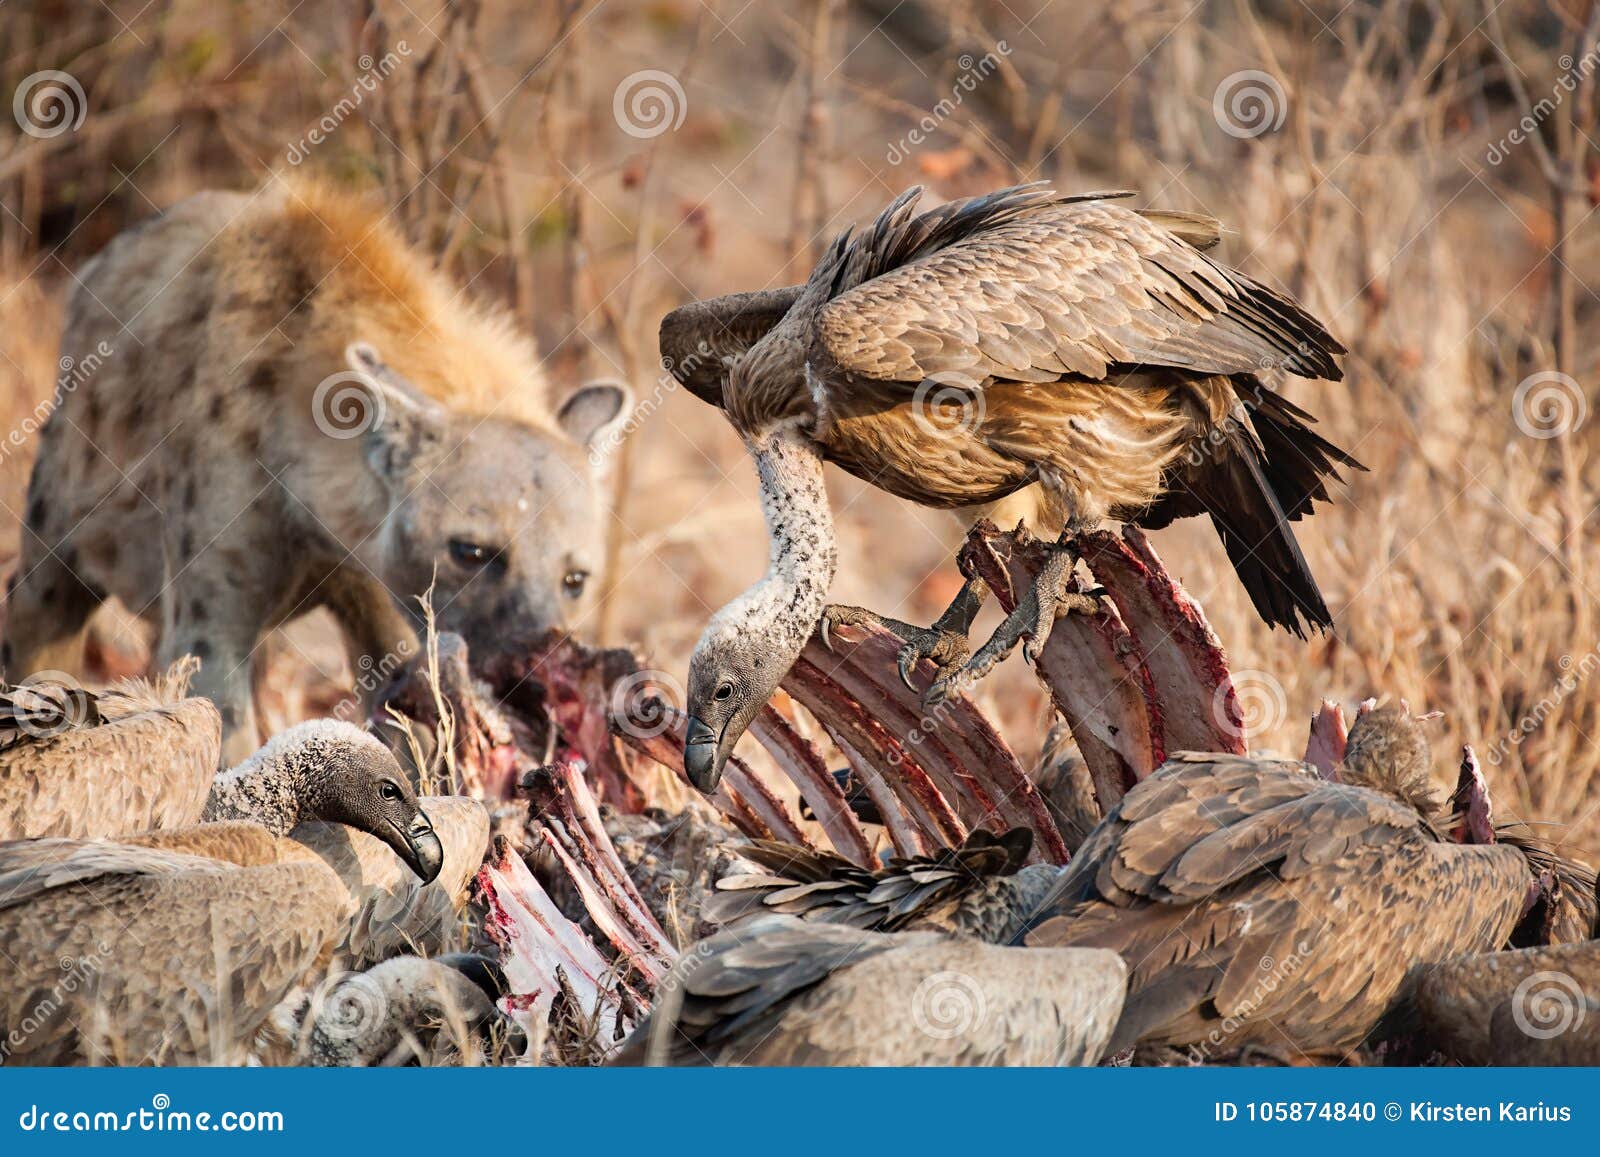 vultures and hyena